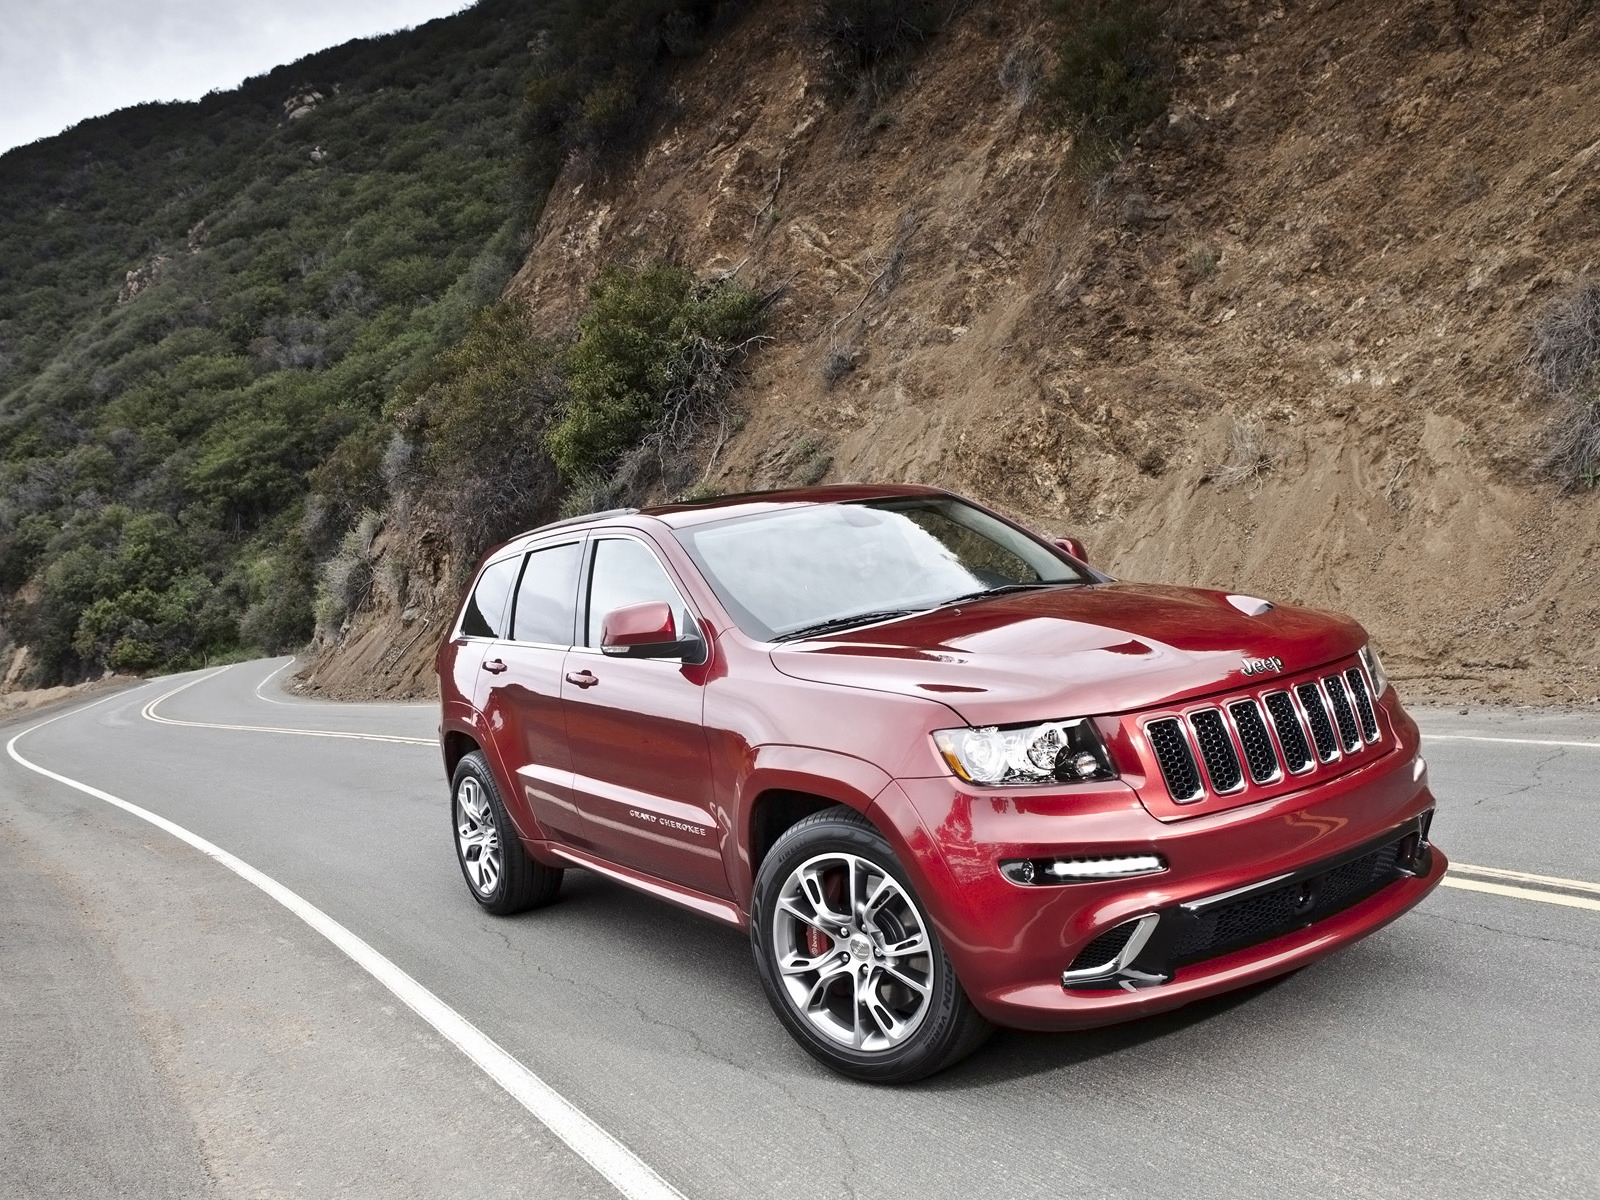 2012 Jeep Grand Cherokee SRT8 Speed for 1600 x 1200 resolution